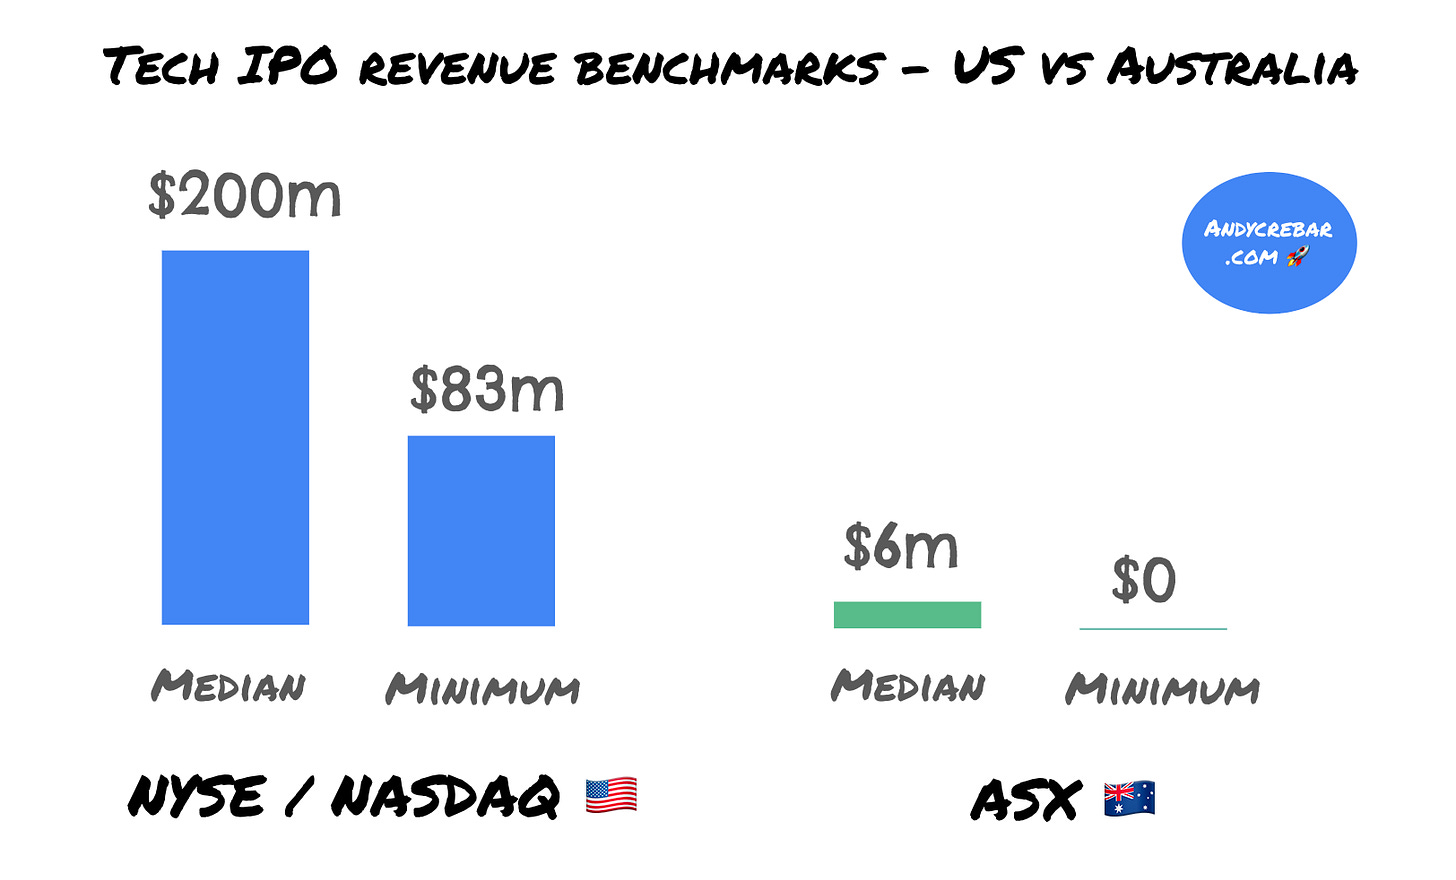 Asx technology IPO benchmarks